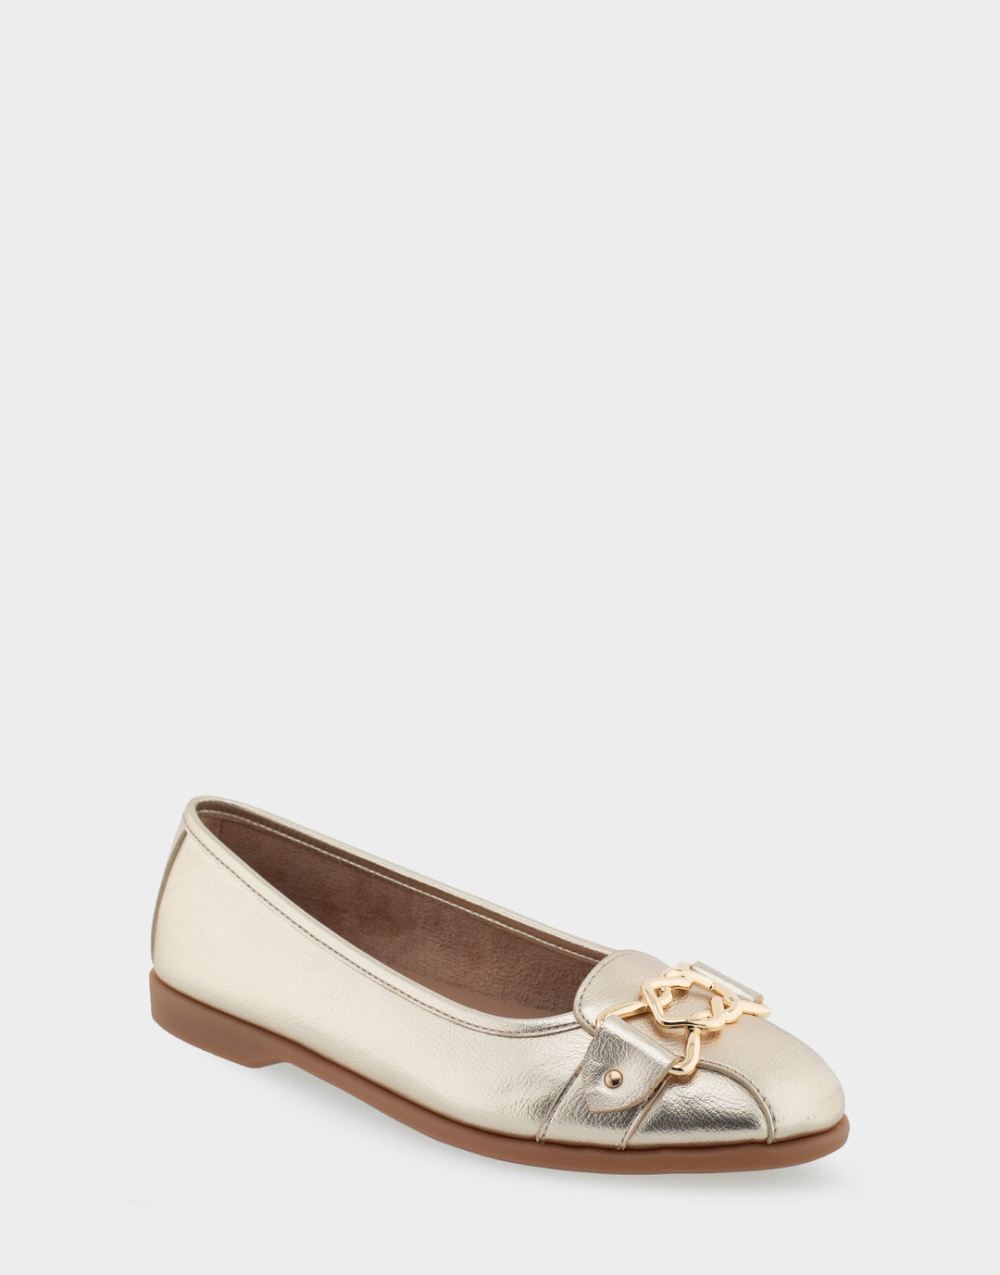 Women's | Bia Soft Gold Faux Leather Ornamented Flat